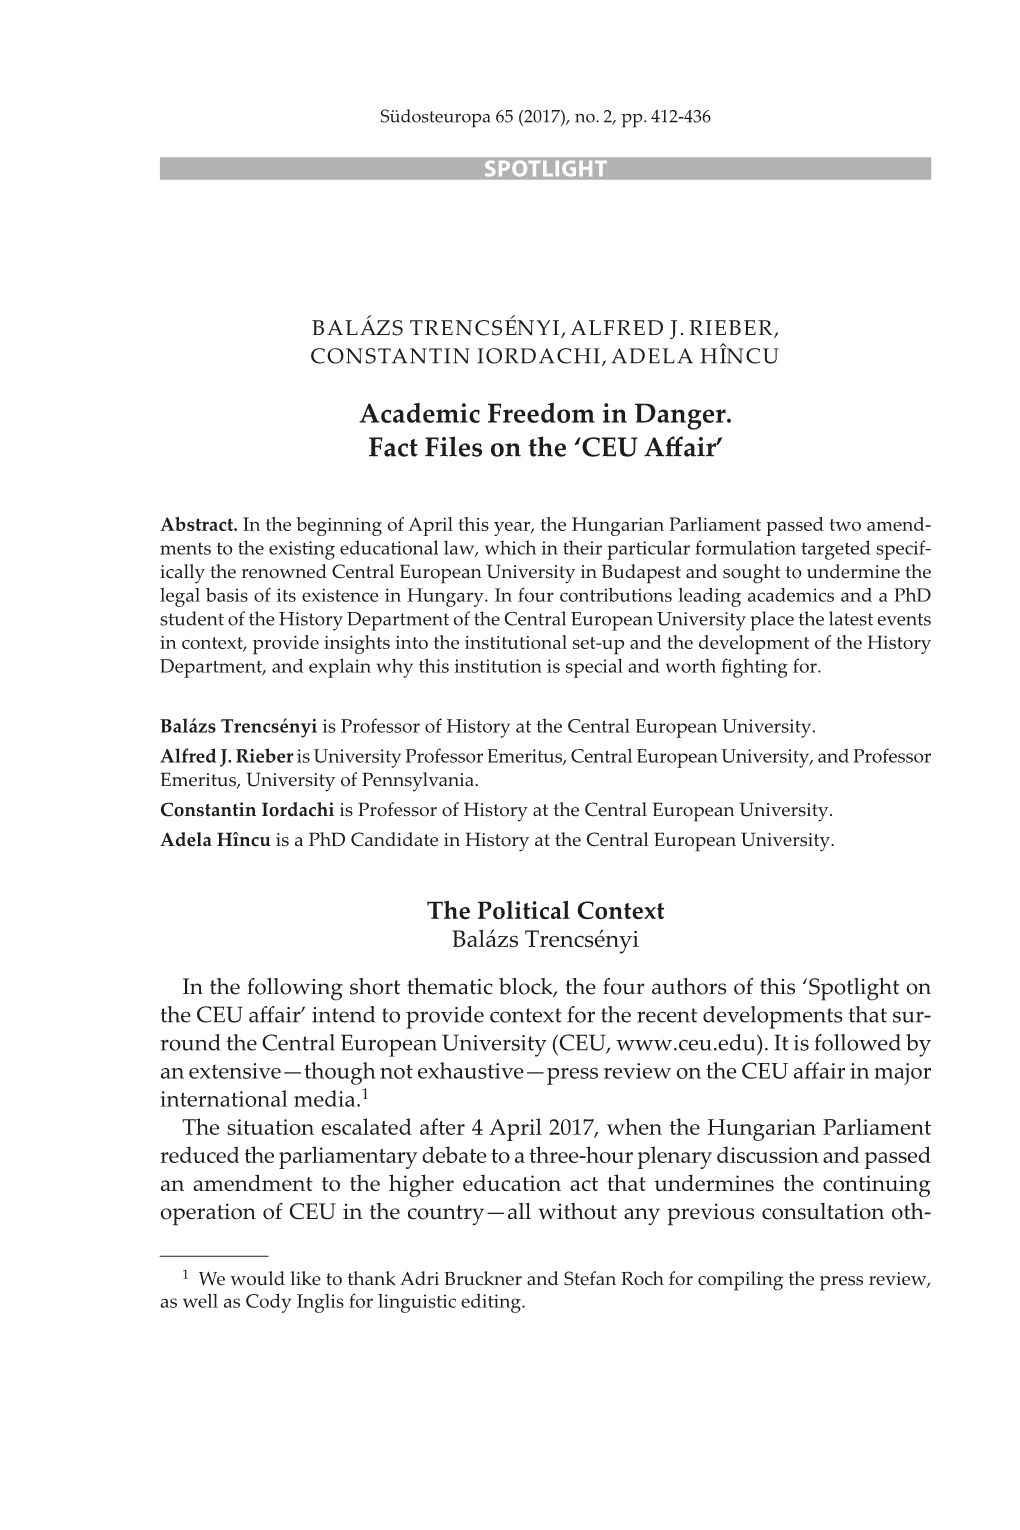 Academic Freedom in Danger. Fact Files on the ‘CEU Affair’